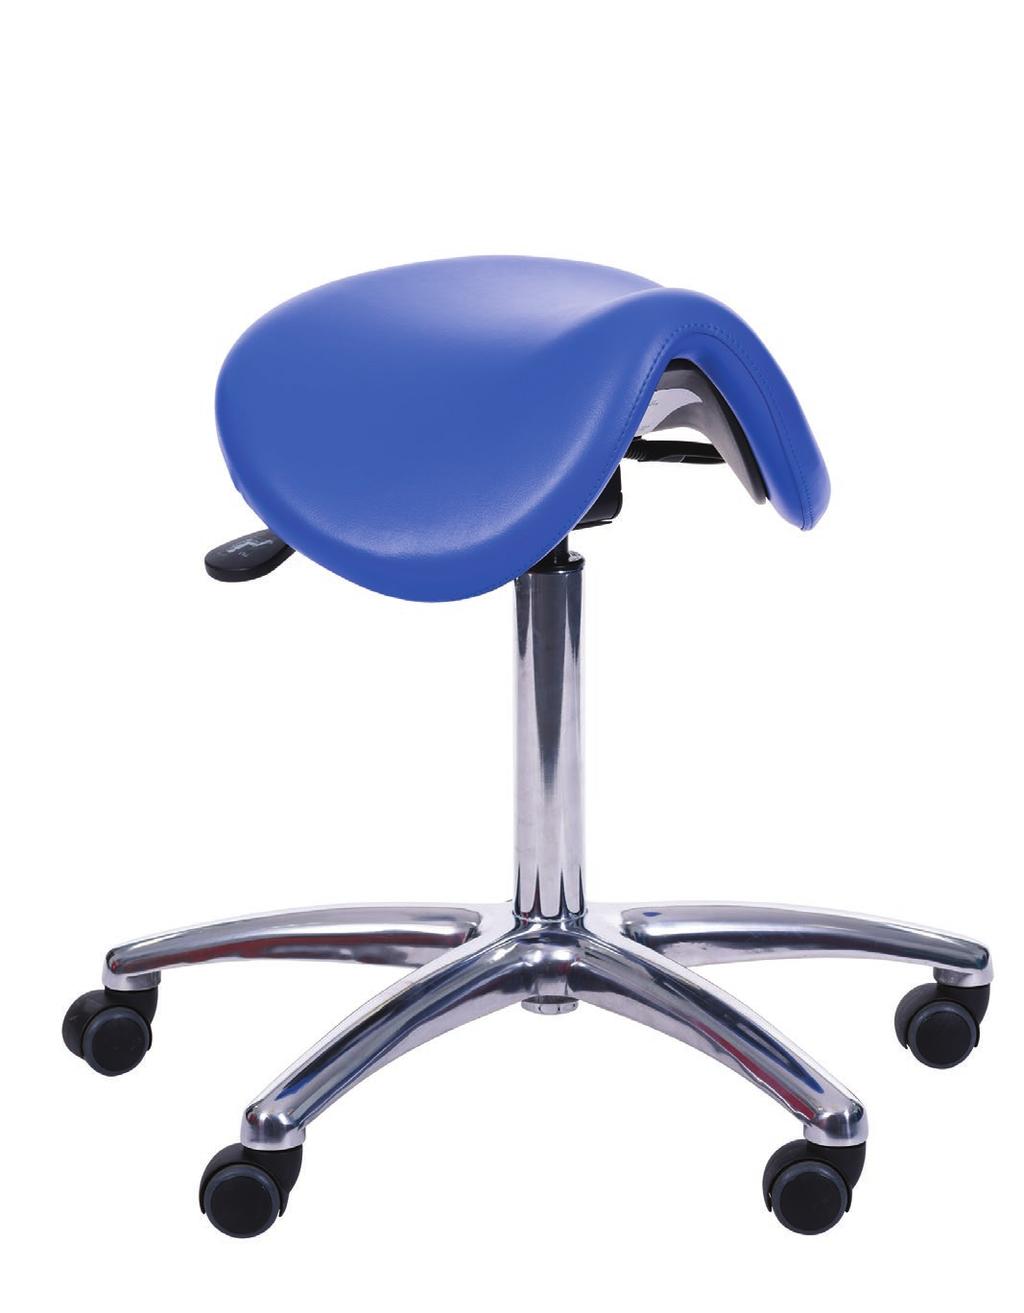 STAFF SEATING Scarp The key component of our Scarp saddle stool is the ergonomic seat which is designed to give the end user the ideal seating posture, and improved circulation to your legs when